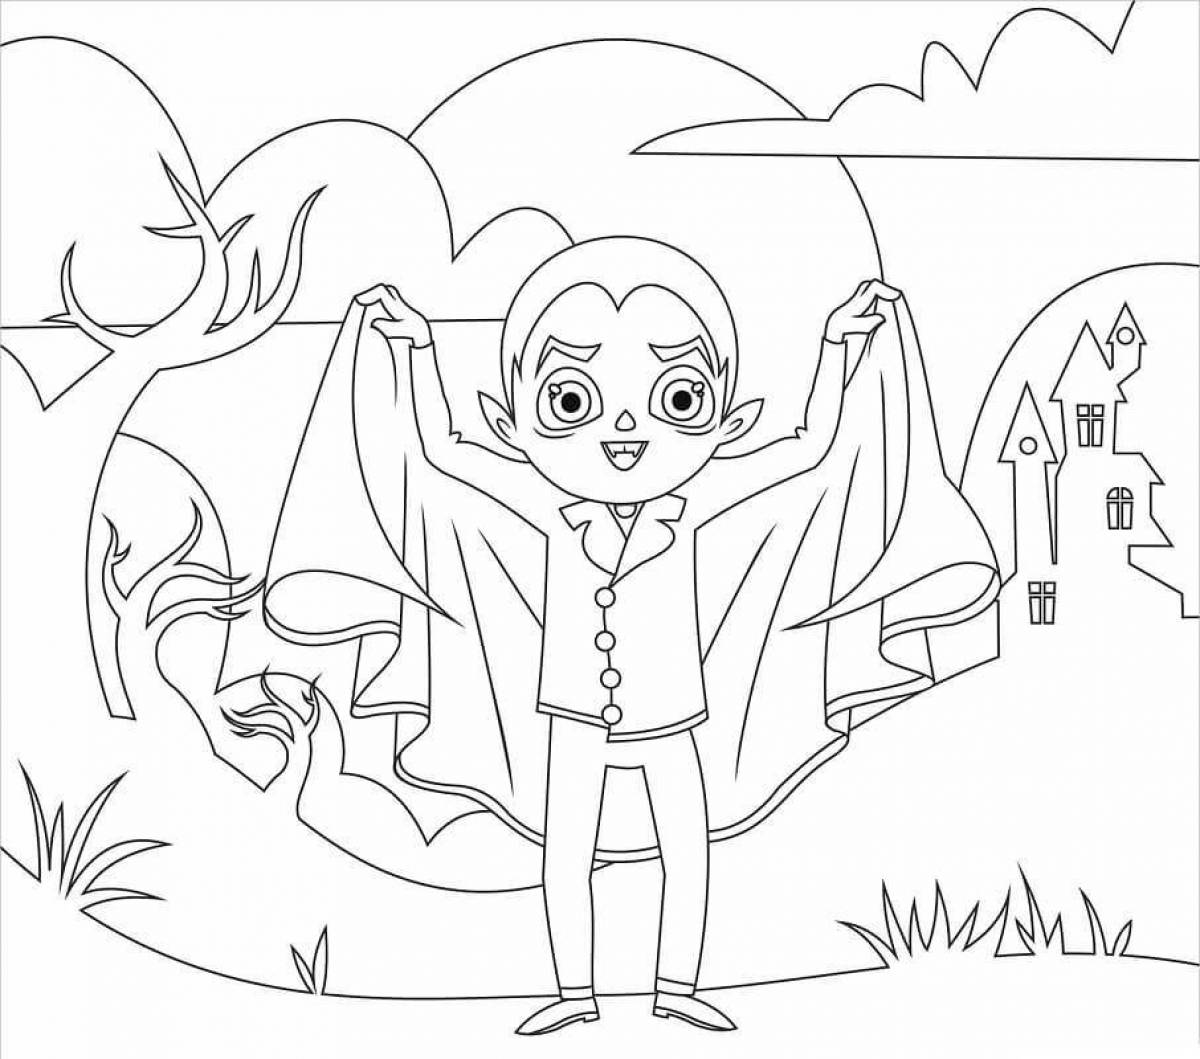 Frightening vampire coloring page